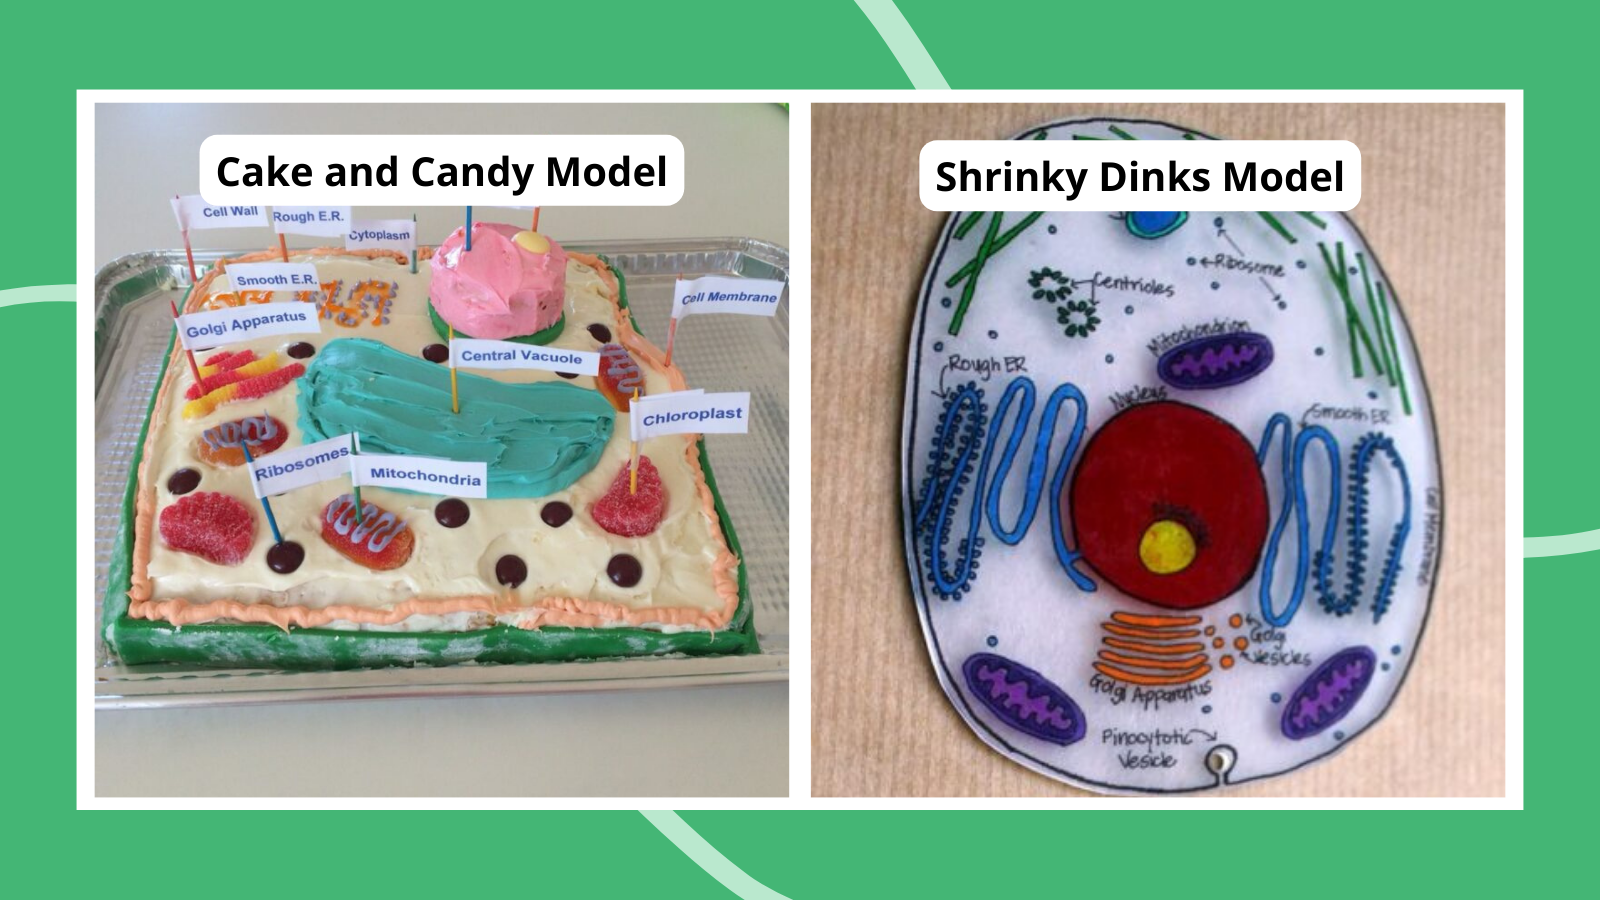 Plant cell project 3D models made from cake and candy and Shrinky Dinks.